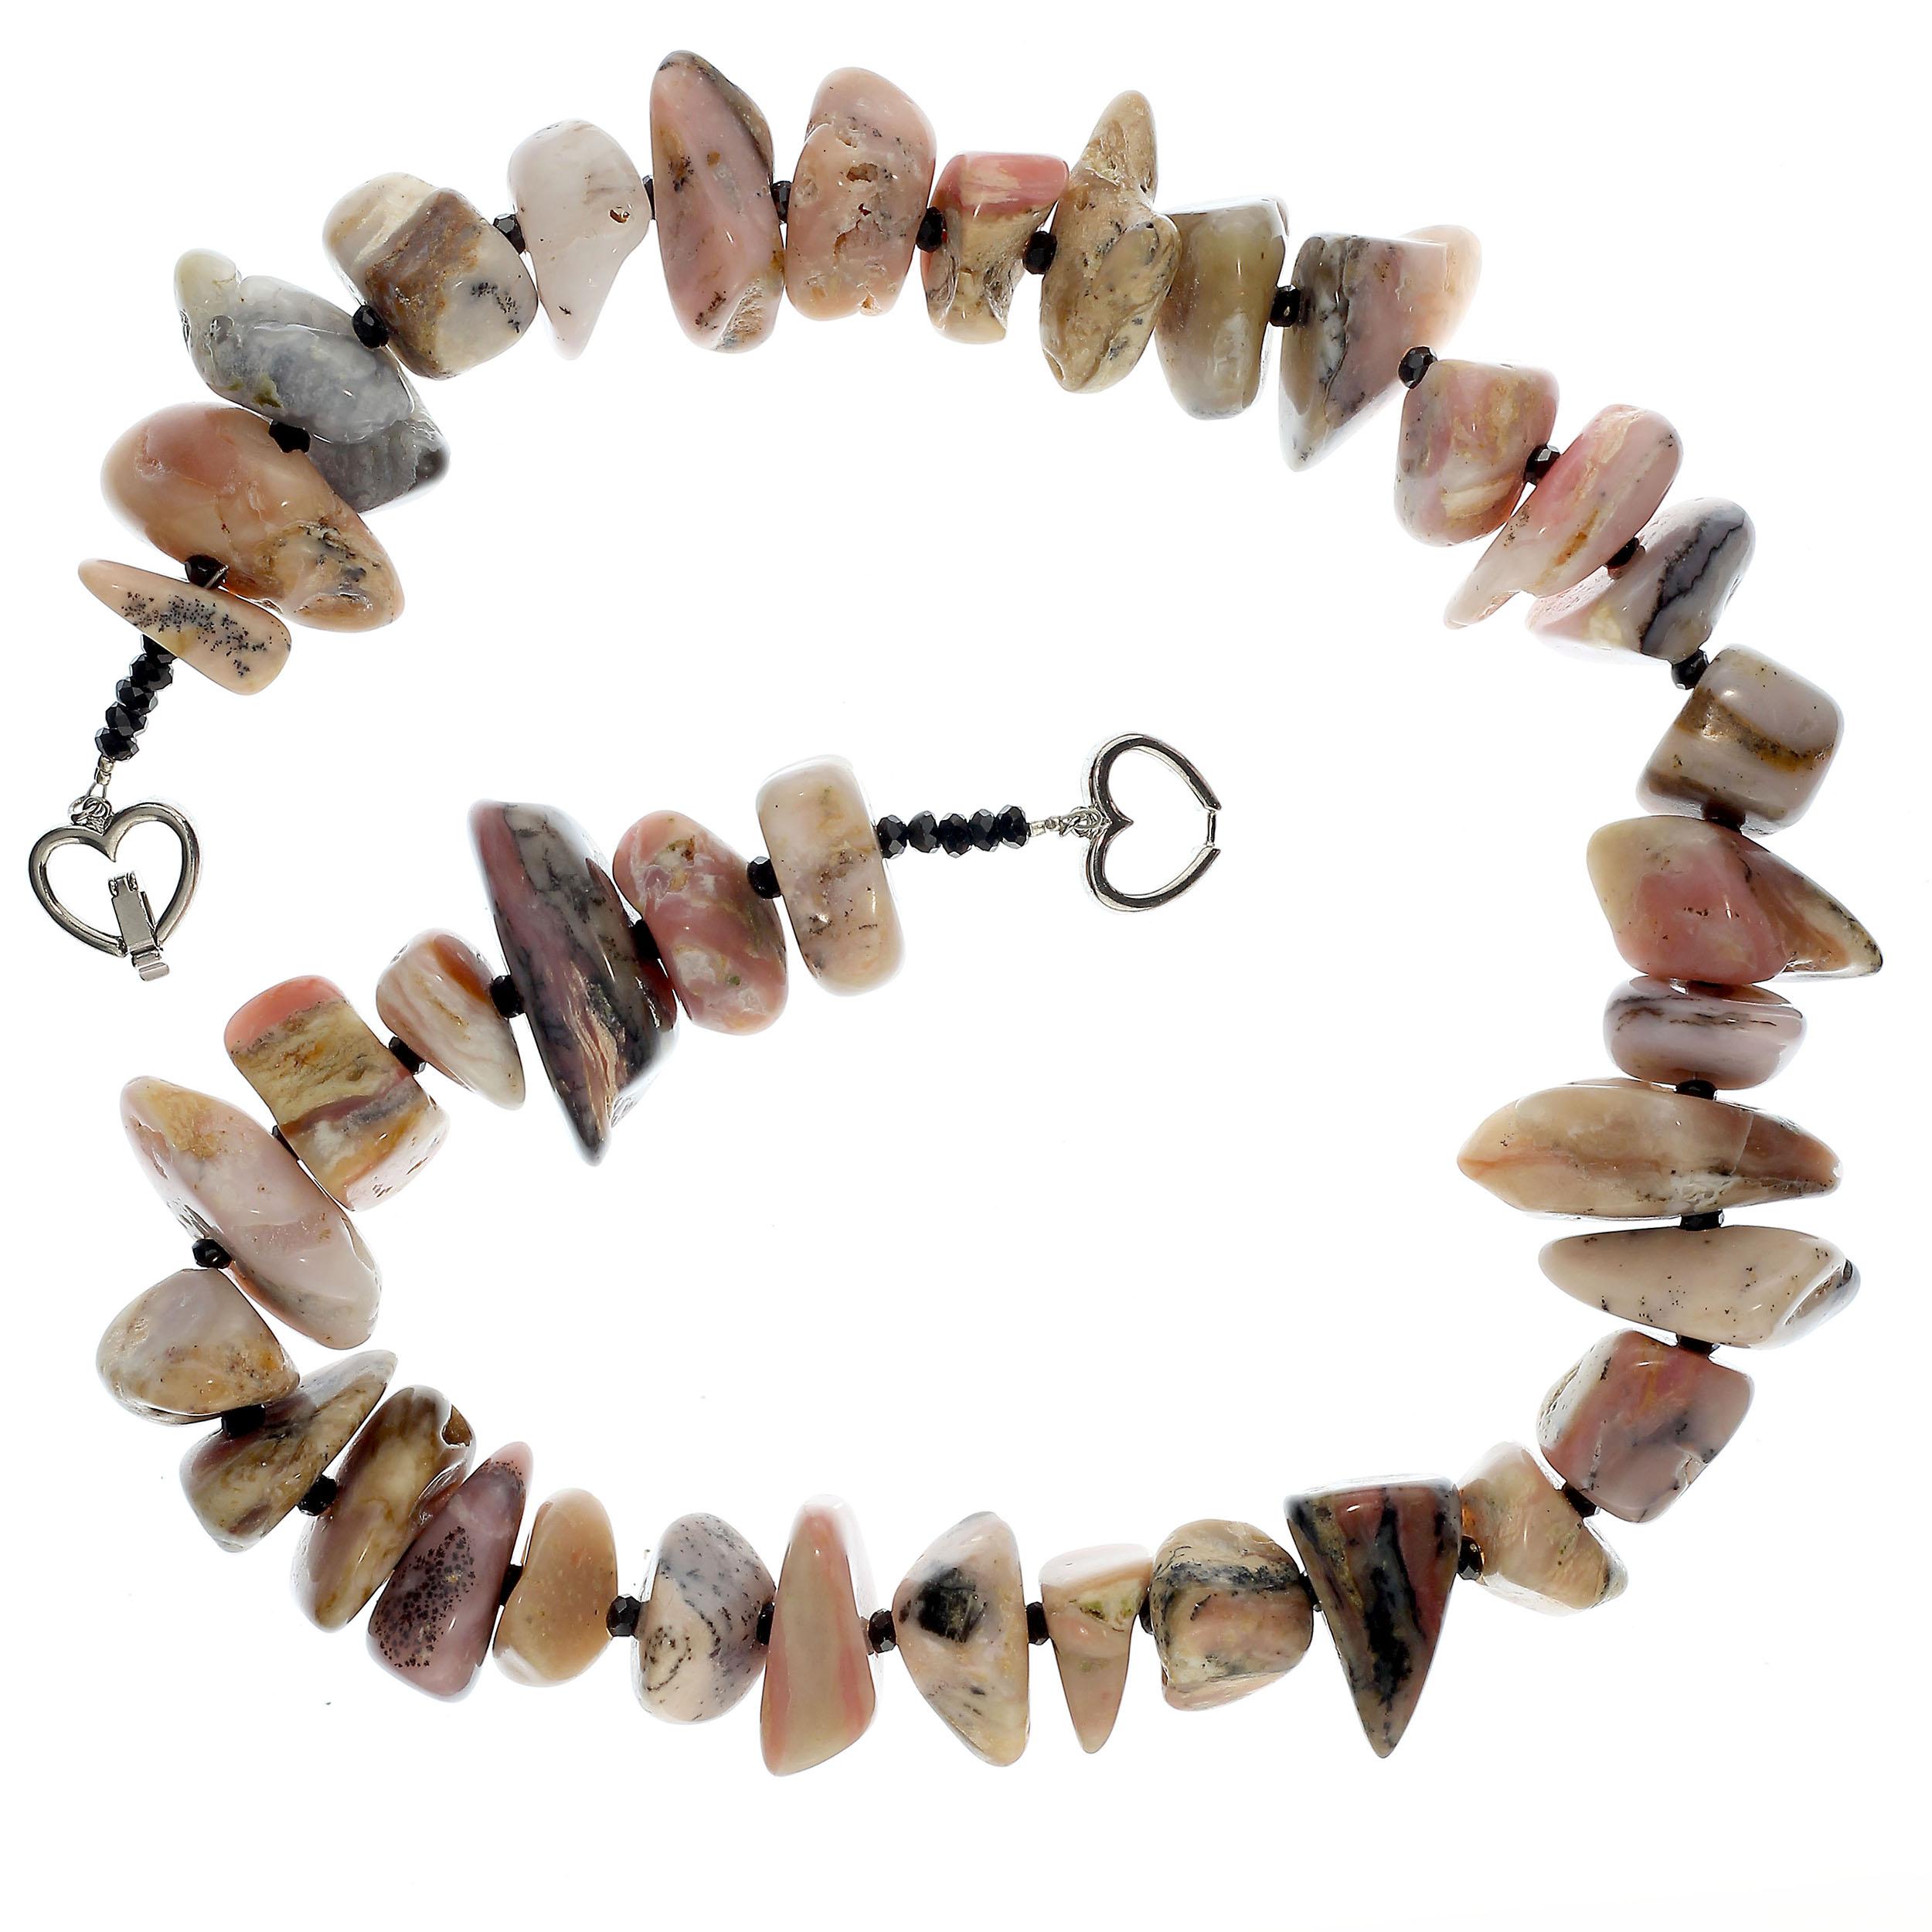 Bead AJD Necklace of Highly Polished Pink Peruvian Opal Nuggets and Black Spinel For Sale